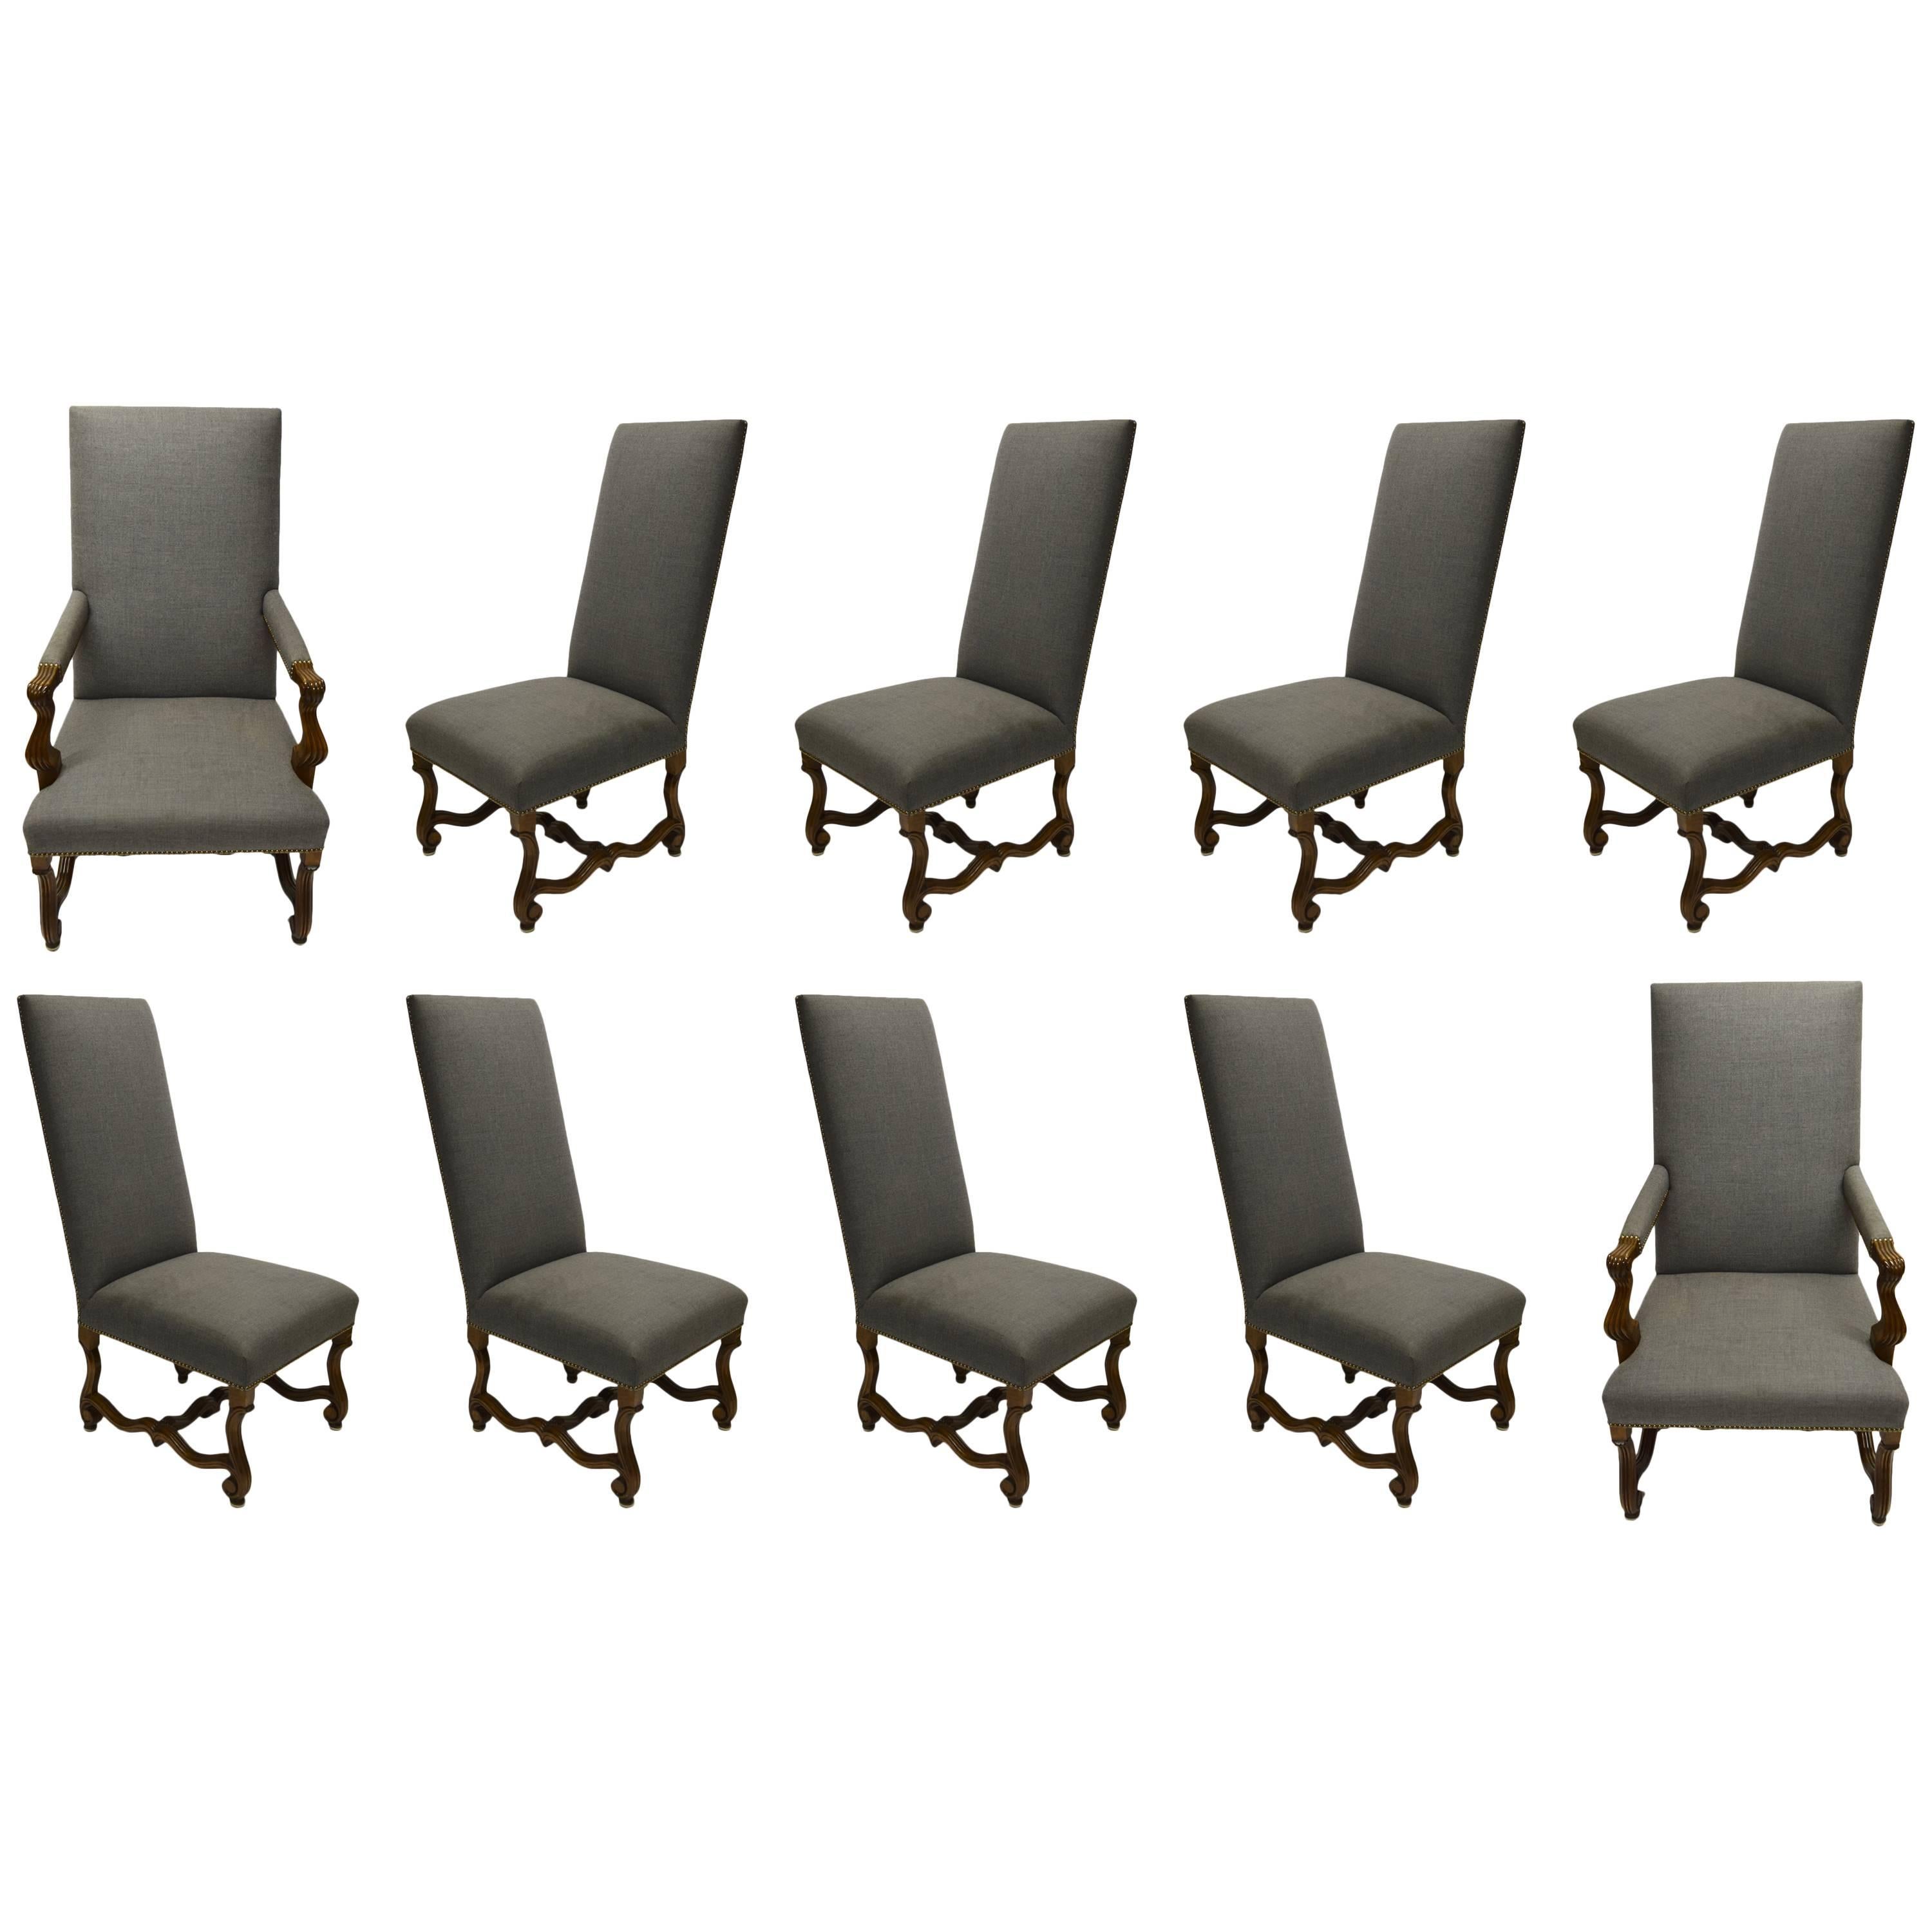 Ten High Back Dining Chairs in Mahogany, USA, Early 2000s